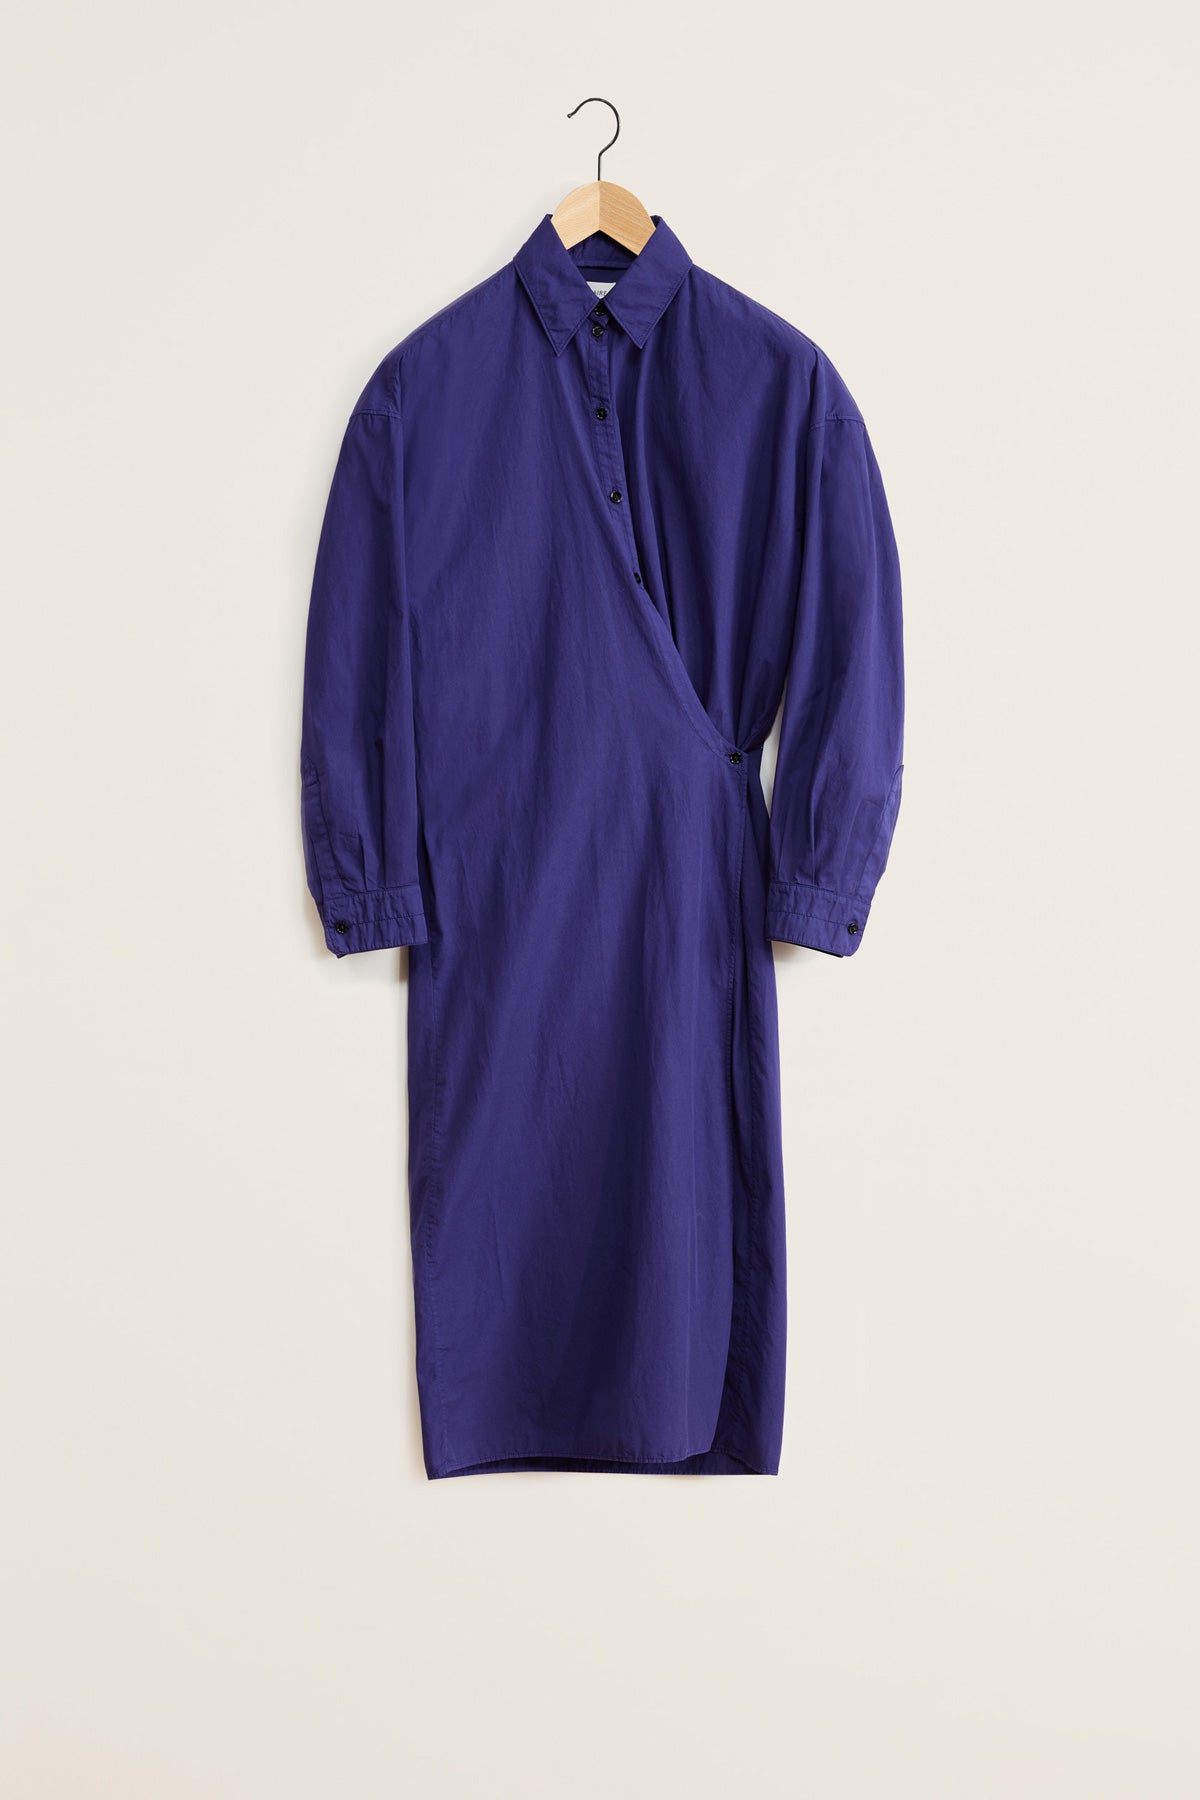 Lemaire — Straight Collar Twisted Dress / Blue Violet